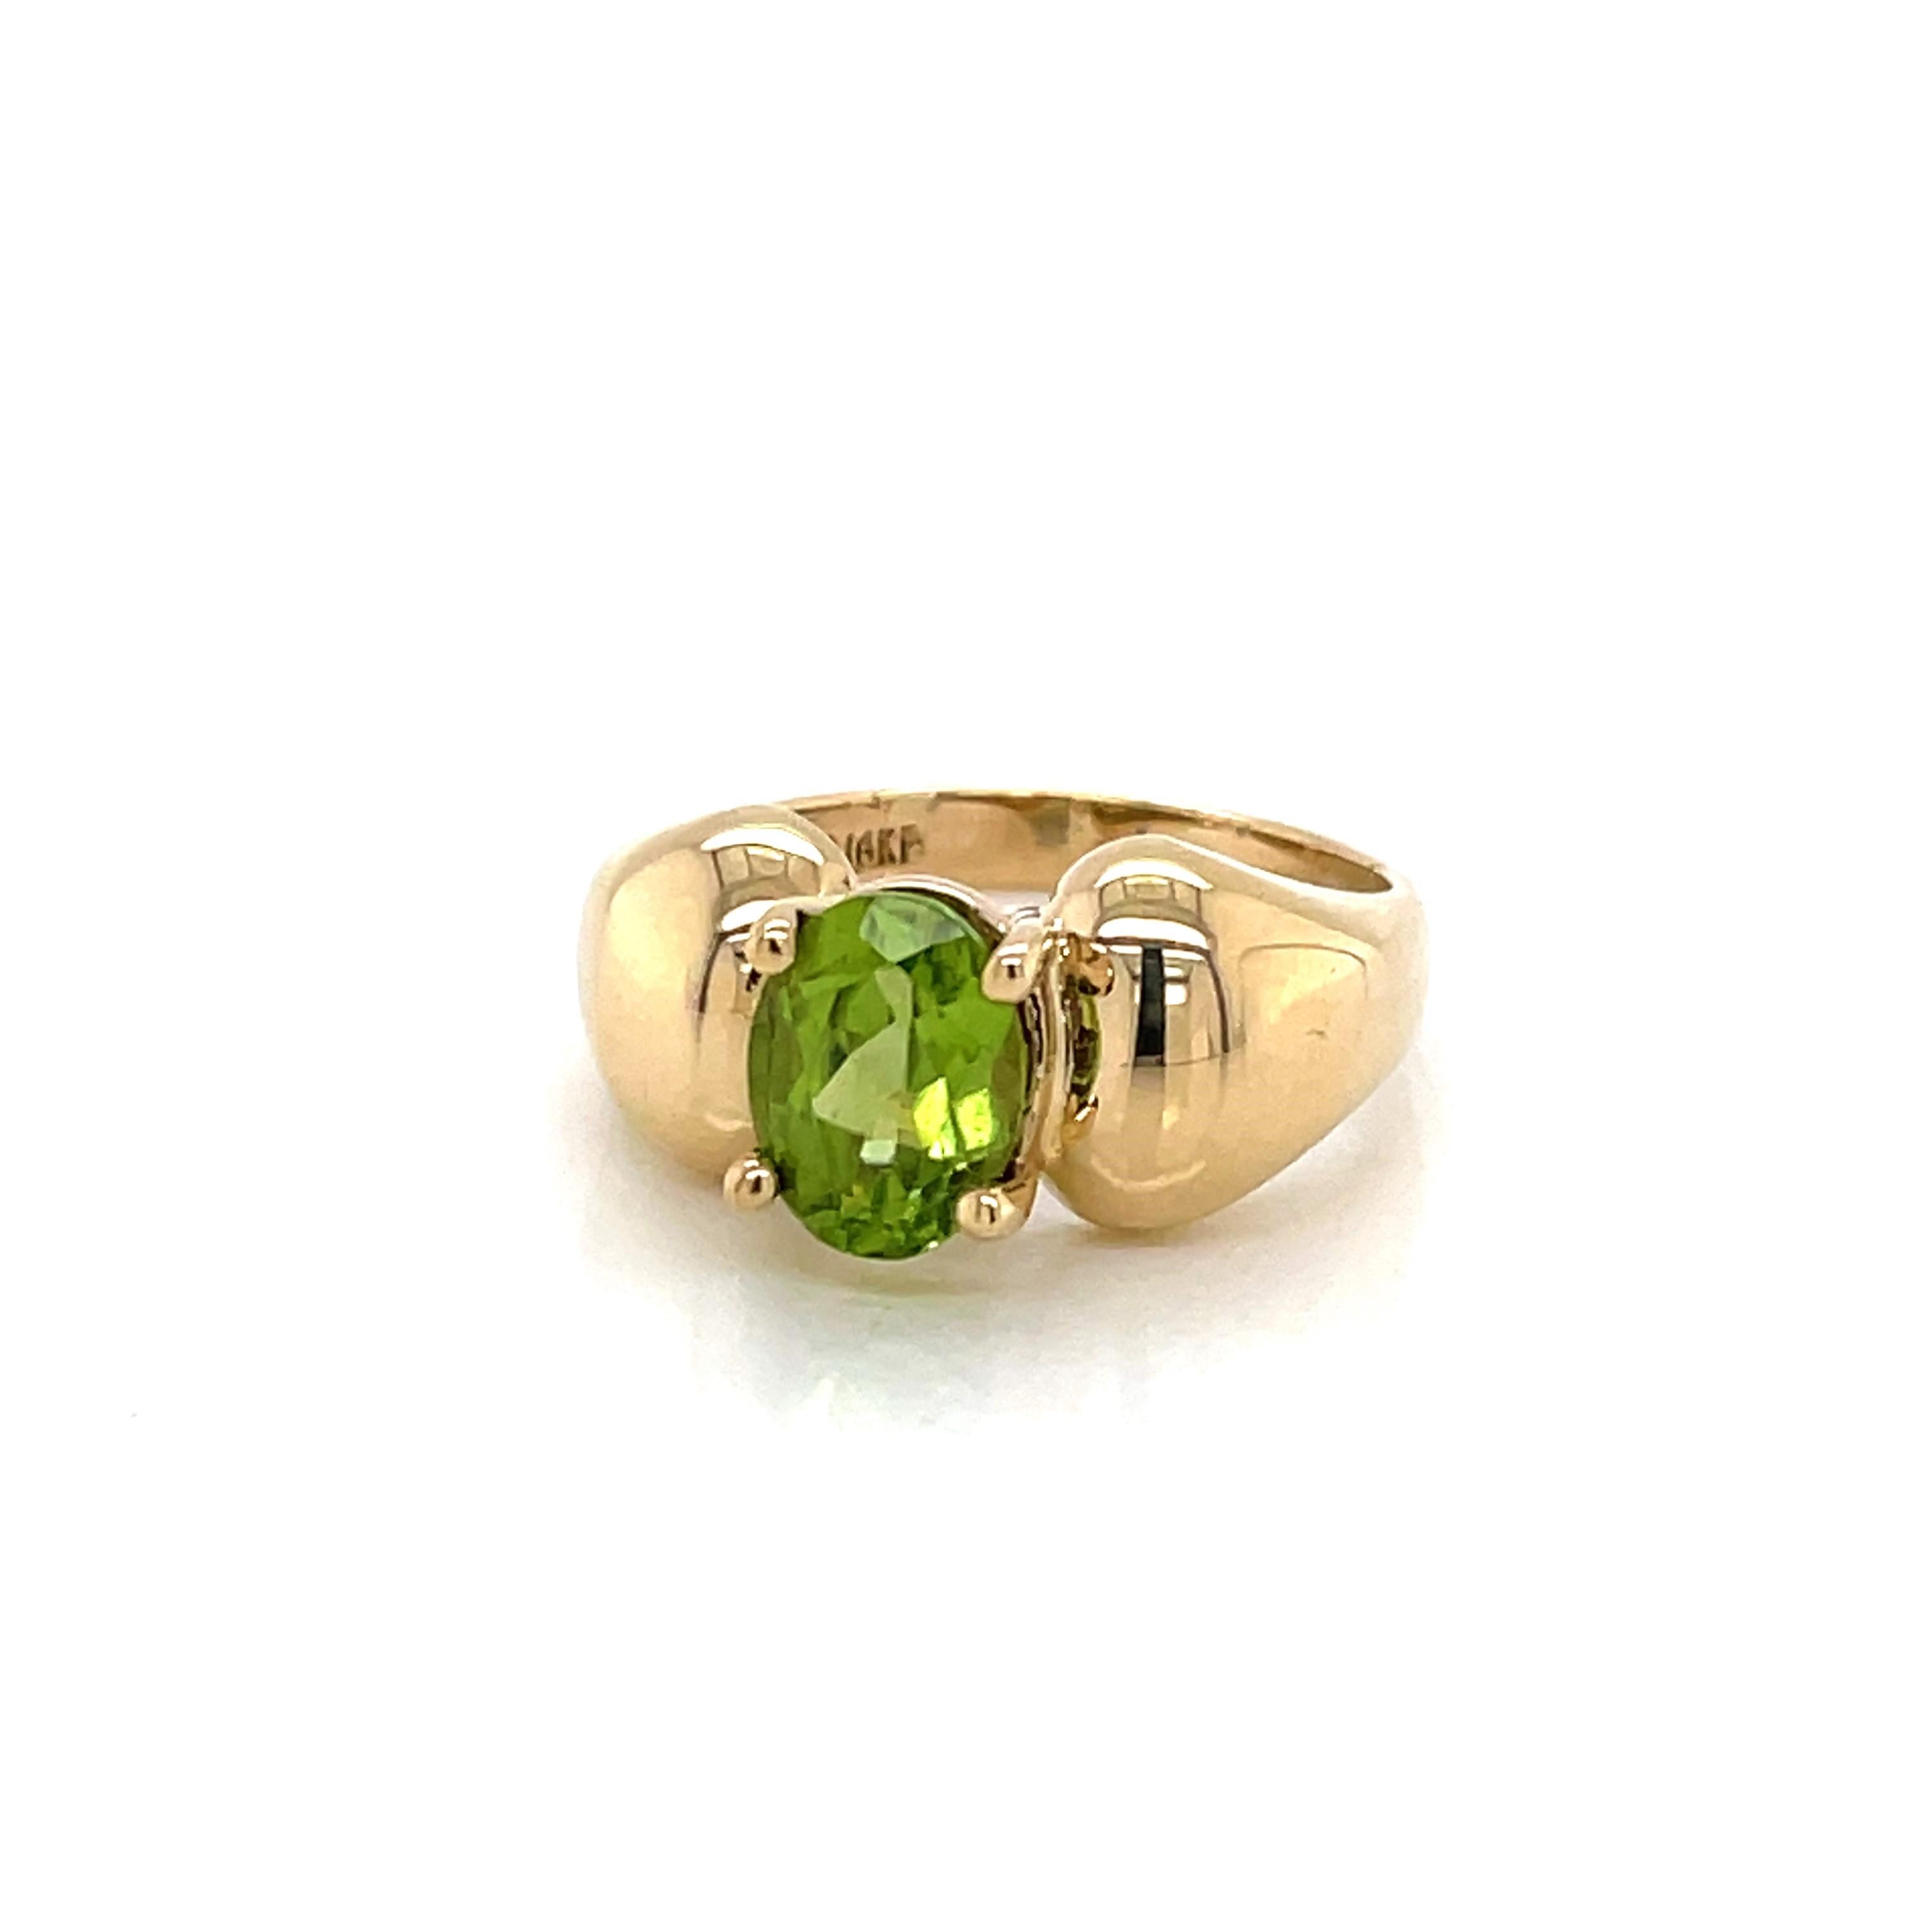 A vivid green 6x8mm oval faceted peridot stone is prominently featured and boldly framed by its uniquely contoured 10 karat yellow gold band. 
Peridot, a semi-precious tone, often thought to symbolize prosperity and good fortune, is also the